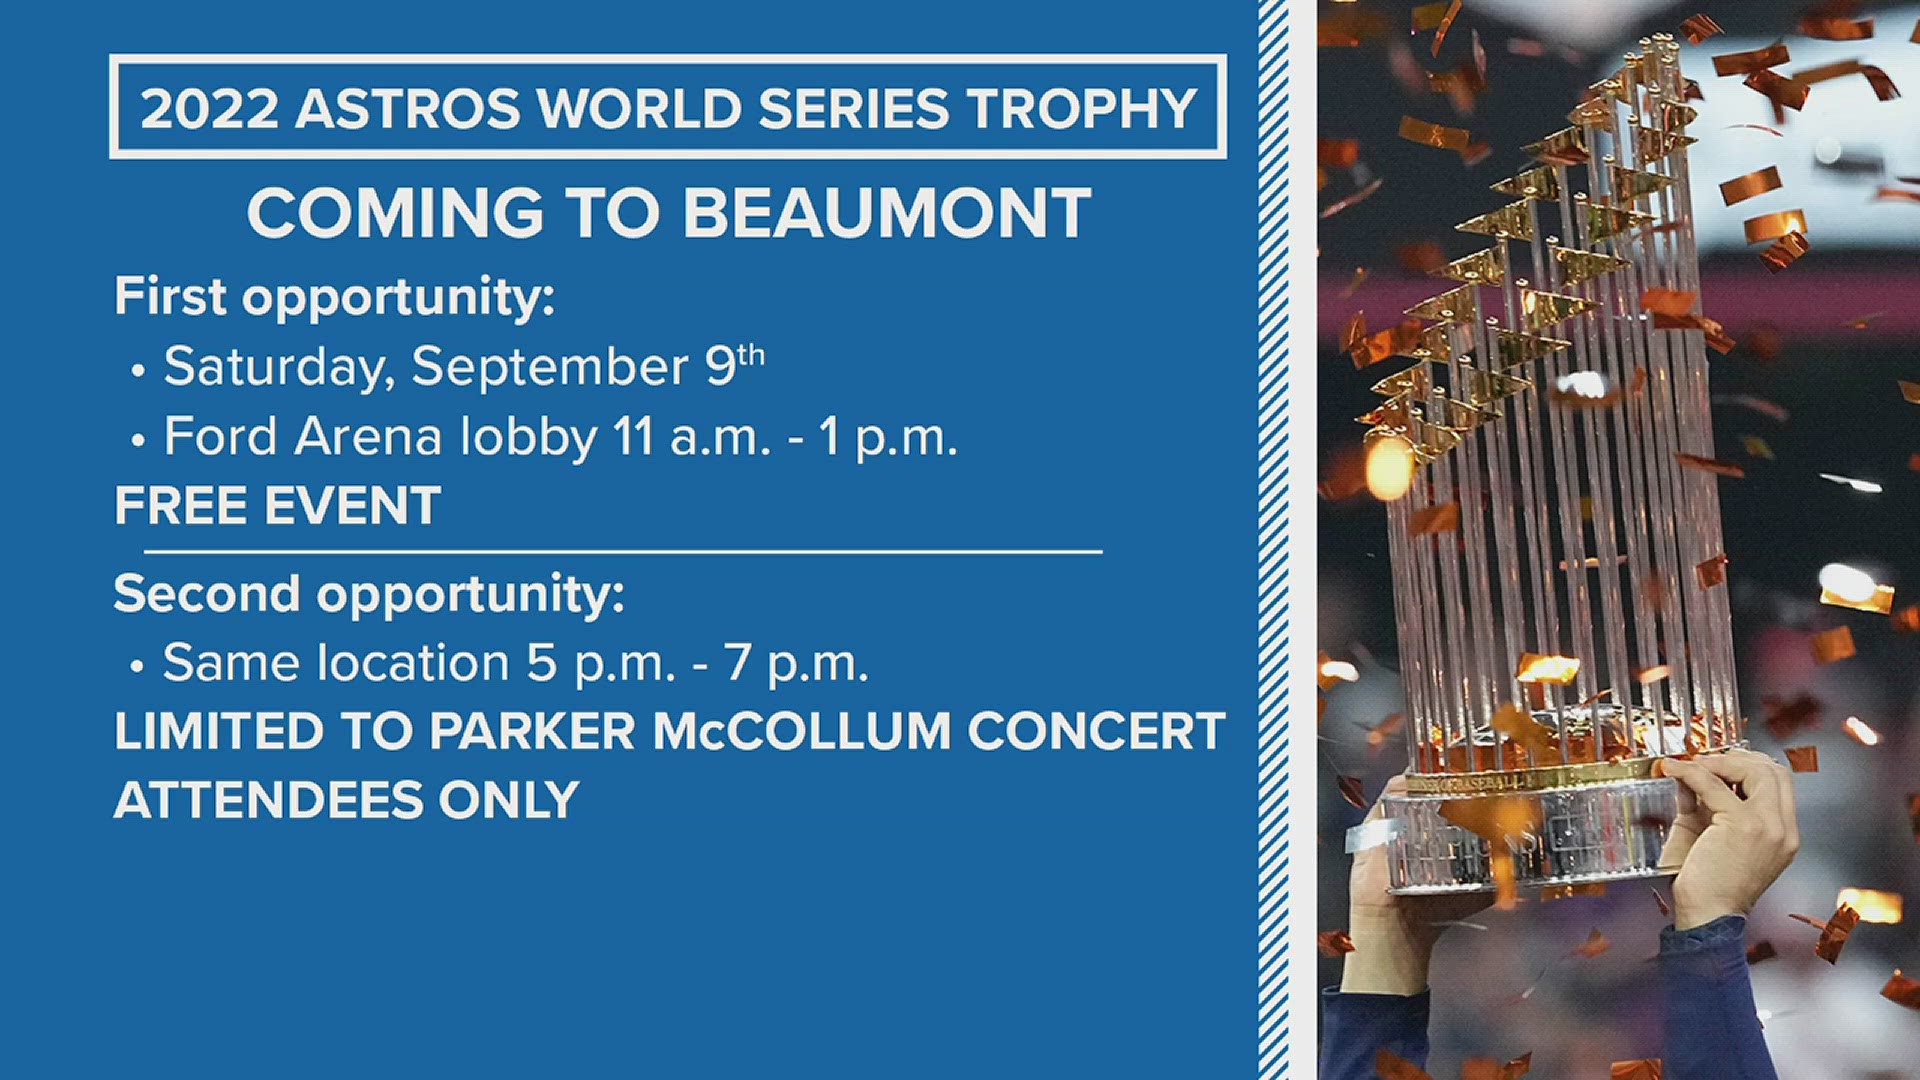 2022 Astros World Series trophy coming to Beaumont on Saturday